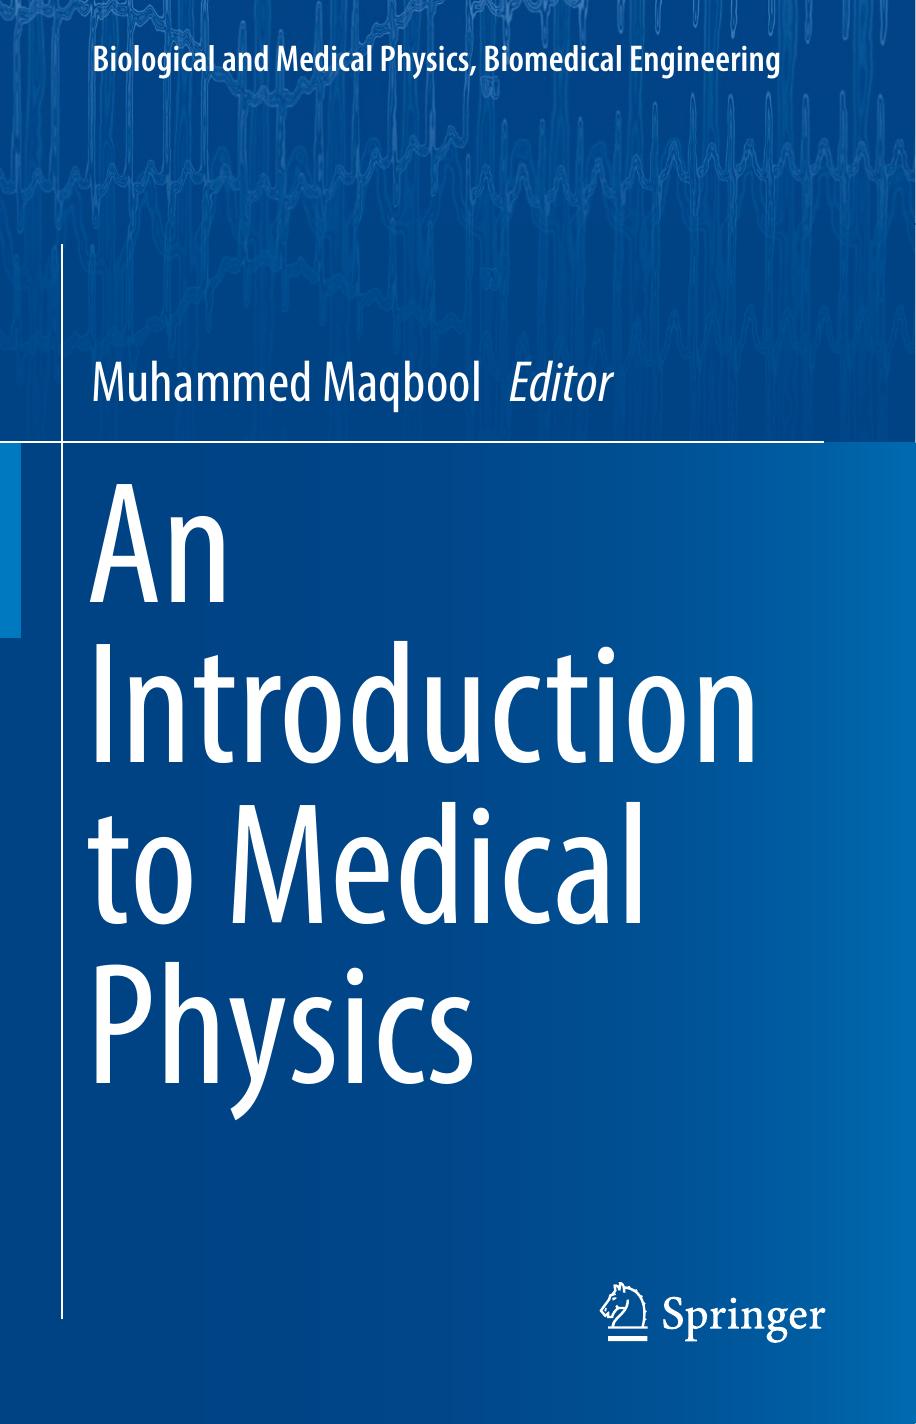 An Introduction to Medical Physics 2017